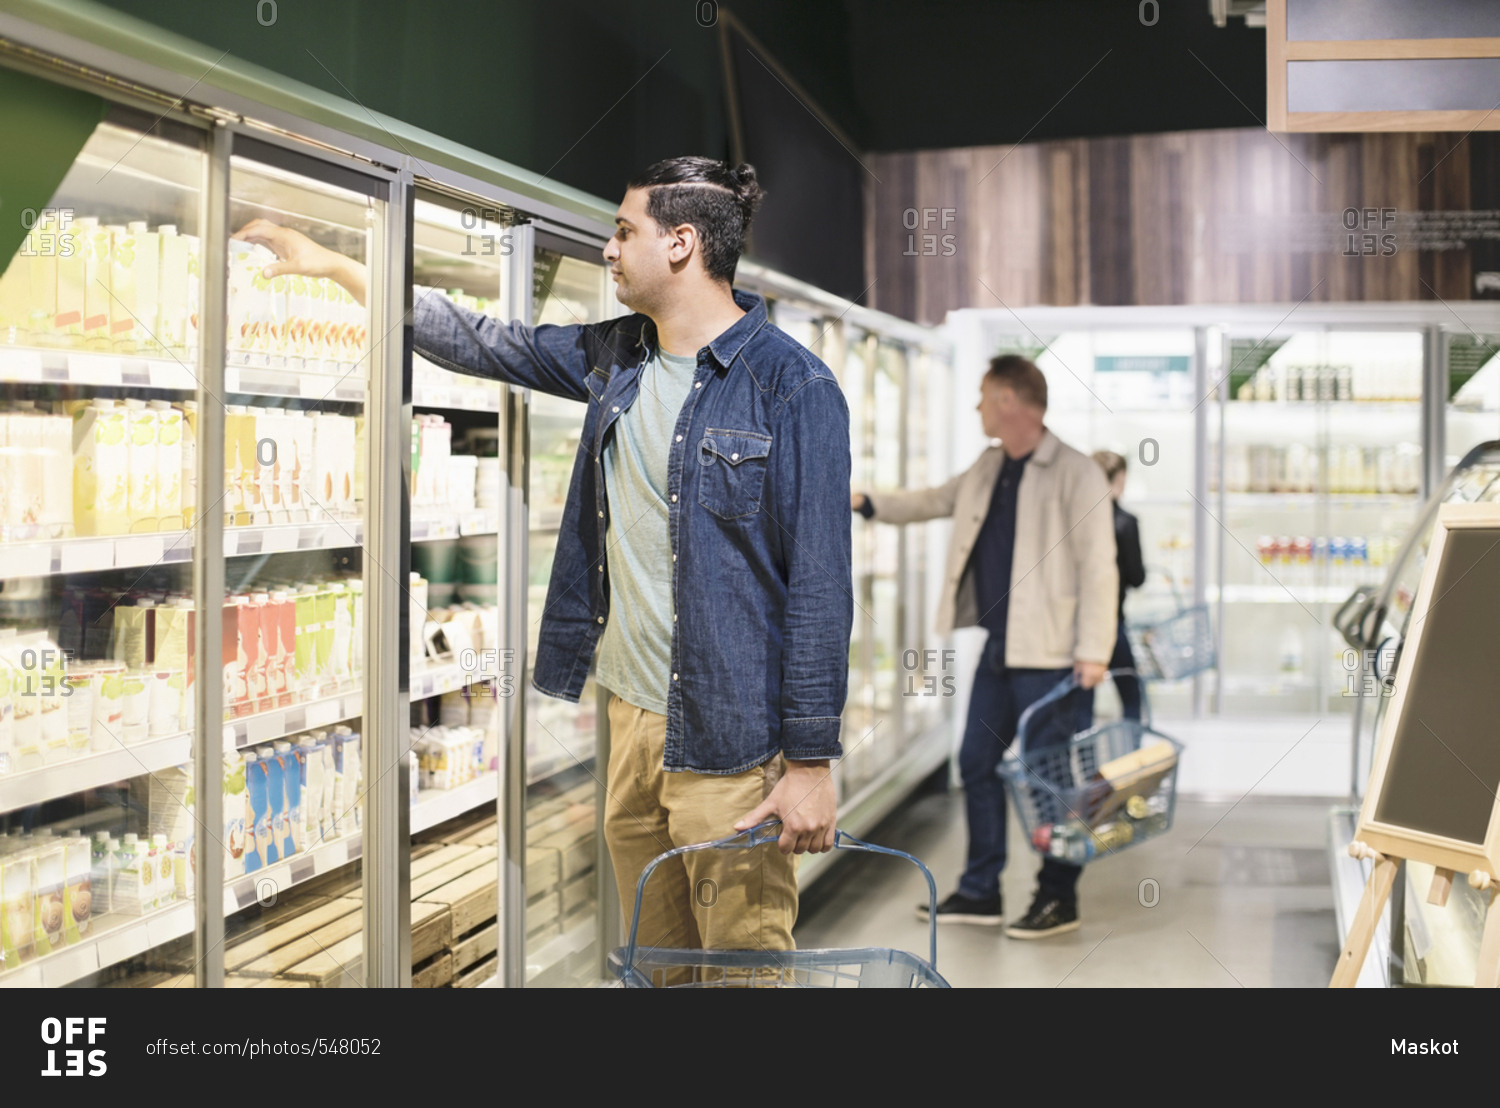 Customers shopping at refrigerated section in supermarket